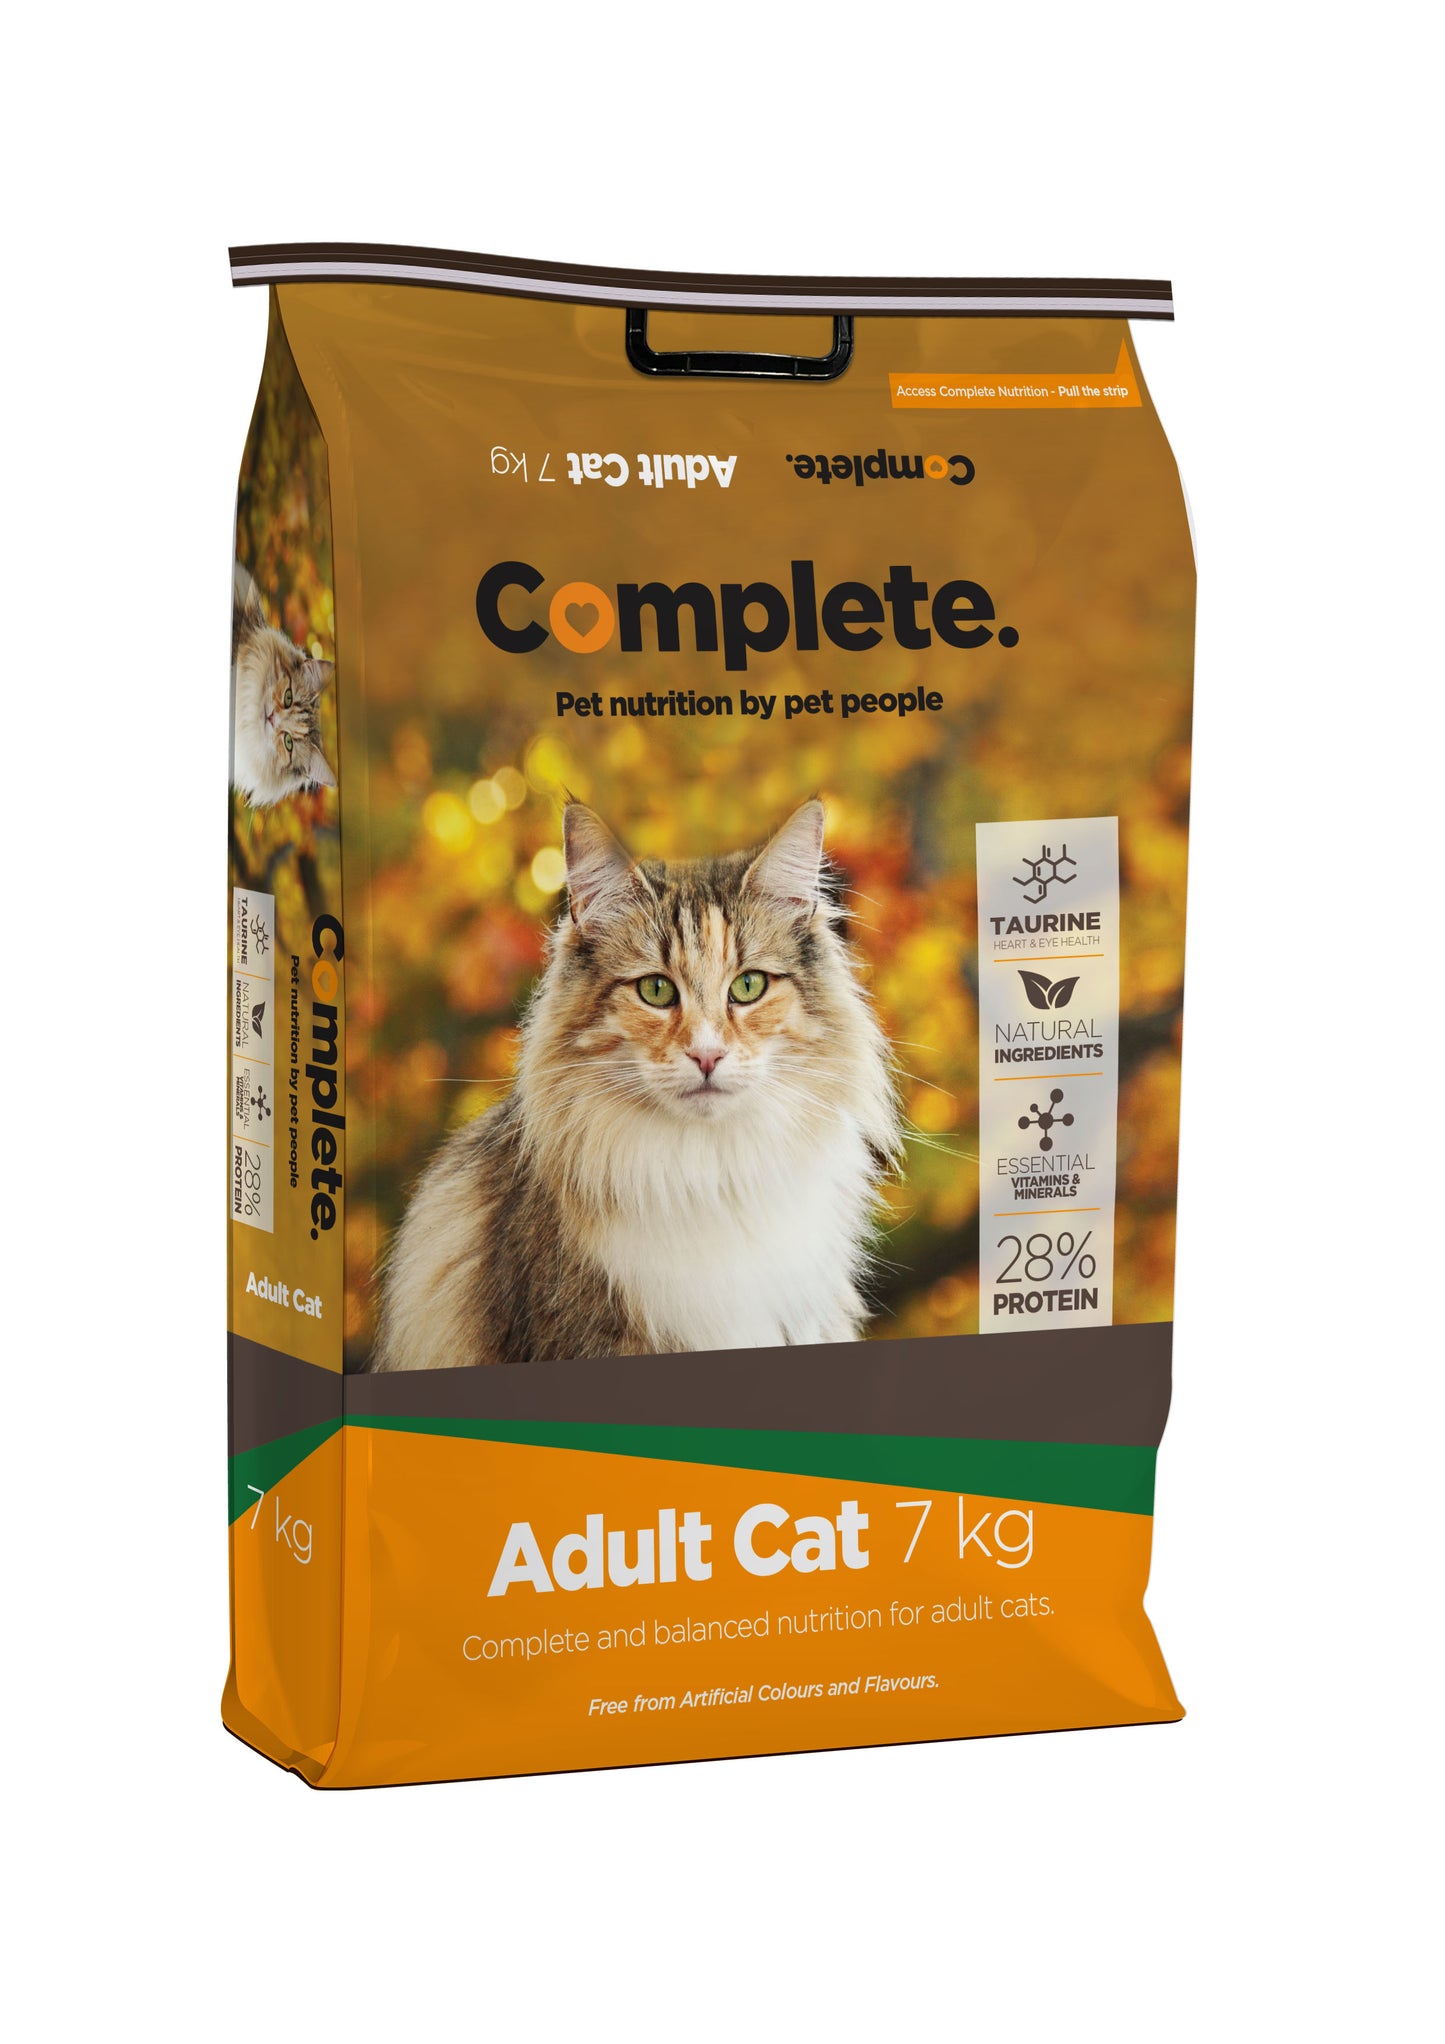 Adult cat 7kg Complete Pet Food For Cats from Pets Planet - South Africa’s No.1 Online Pet Store for premium pet products, best pet store near me, cat food, cat wet food, complete cat food, pet food, dog bed, dog beds, washable dog bed, takealot dog bed, plush dog bed, Complete Pet Nutrition, Complete pet nutrition cat food, hills dog food, optimizor dog food, royal canin dog food, jock dog food, bobtail dog food, canine cuisine, acana dog food, best dog food, dog food near me, best dog food brands